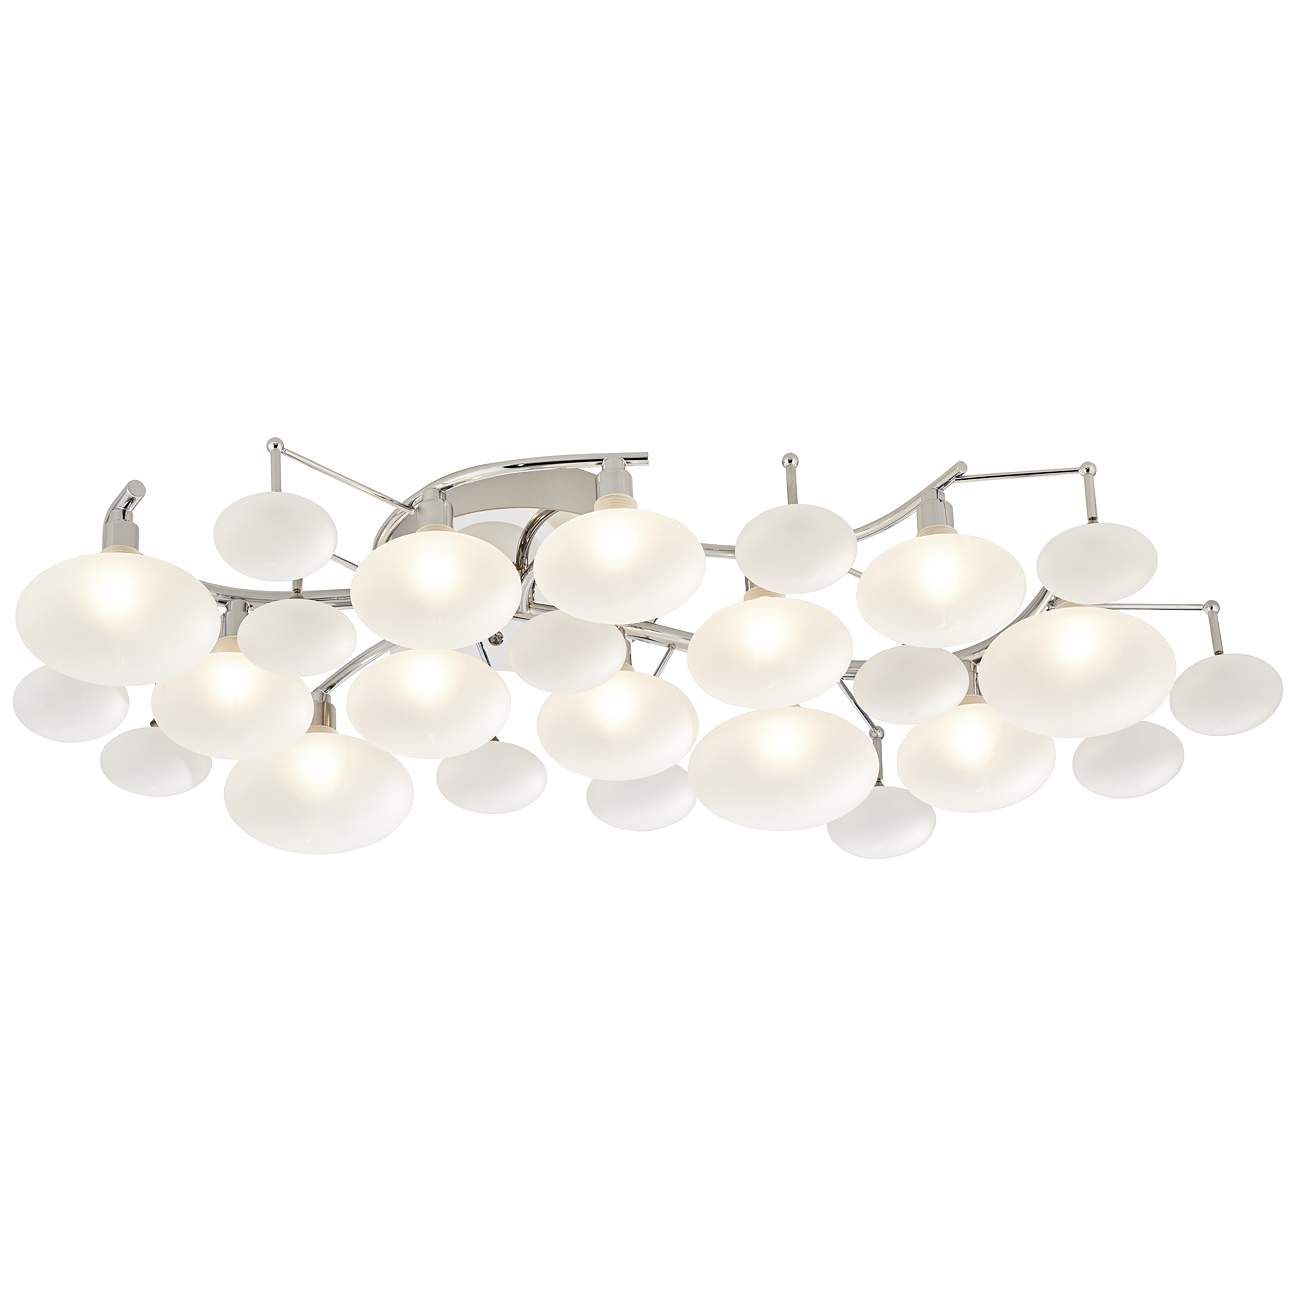 Possini Euro Lilypad 30"W Chrome Frosted Glass Ceiling Light | Lamps Plus